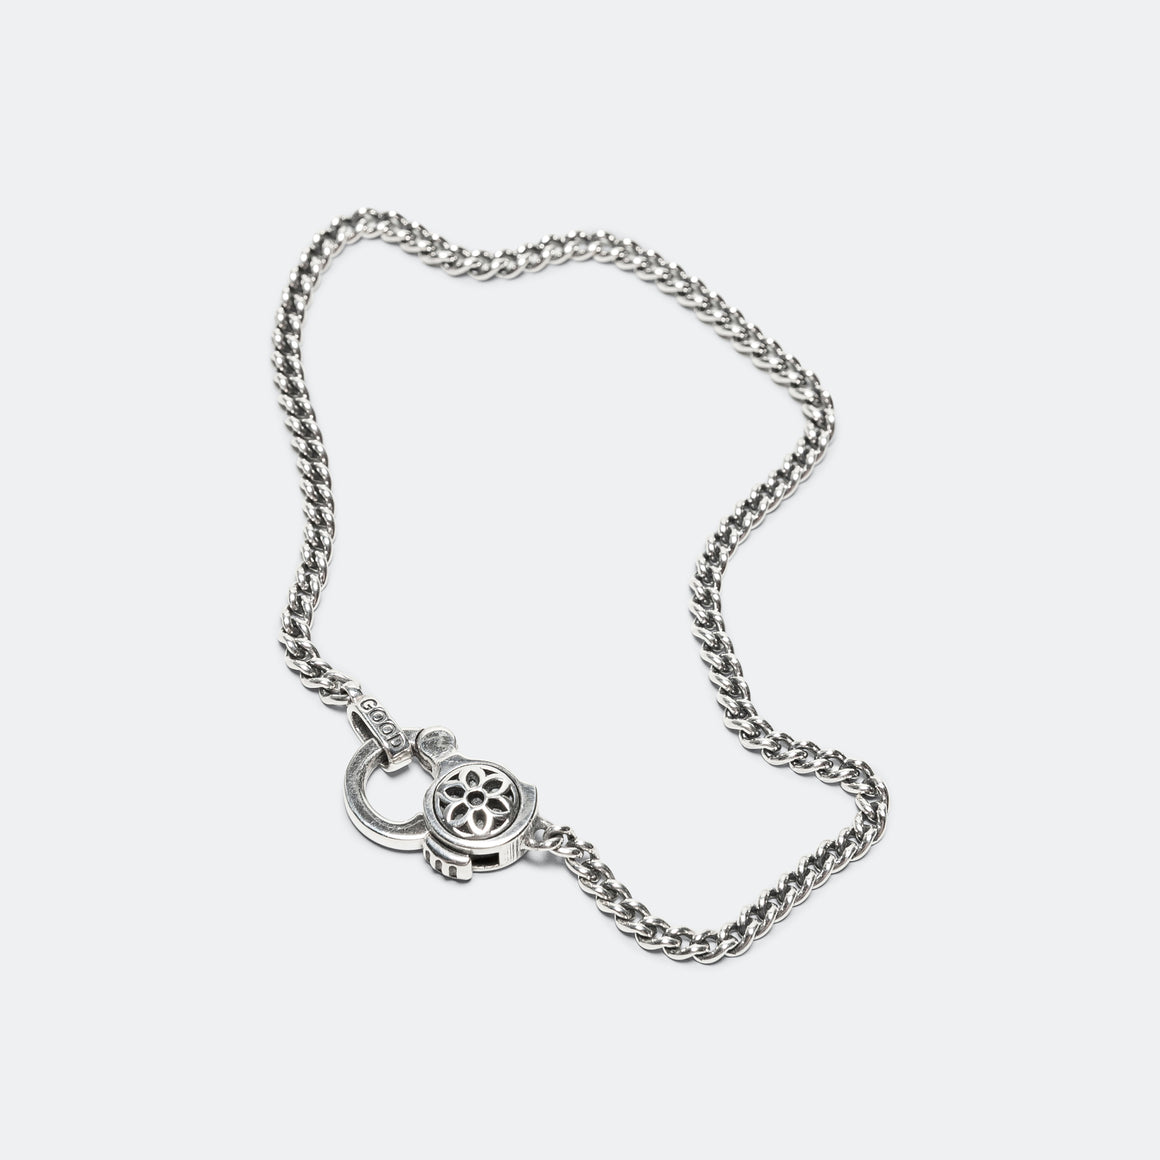 Good Art Hlywd - Curb Chain Bracelet - 4A - 925 Silver - UP THERE